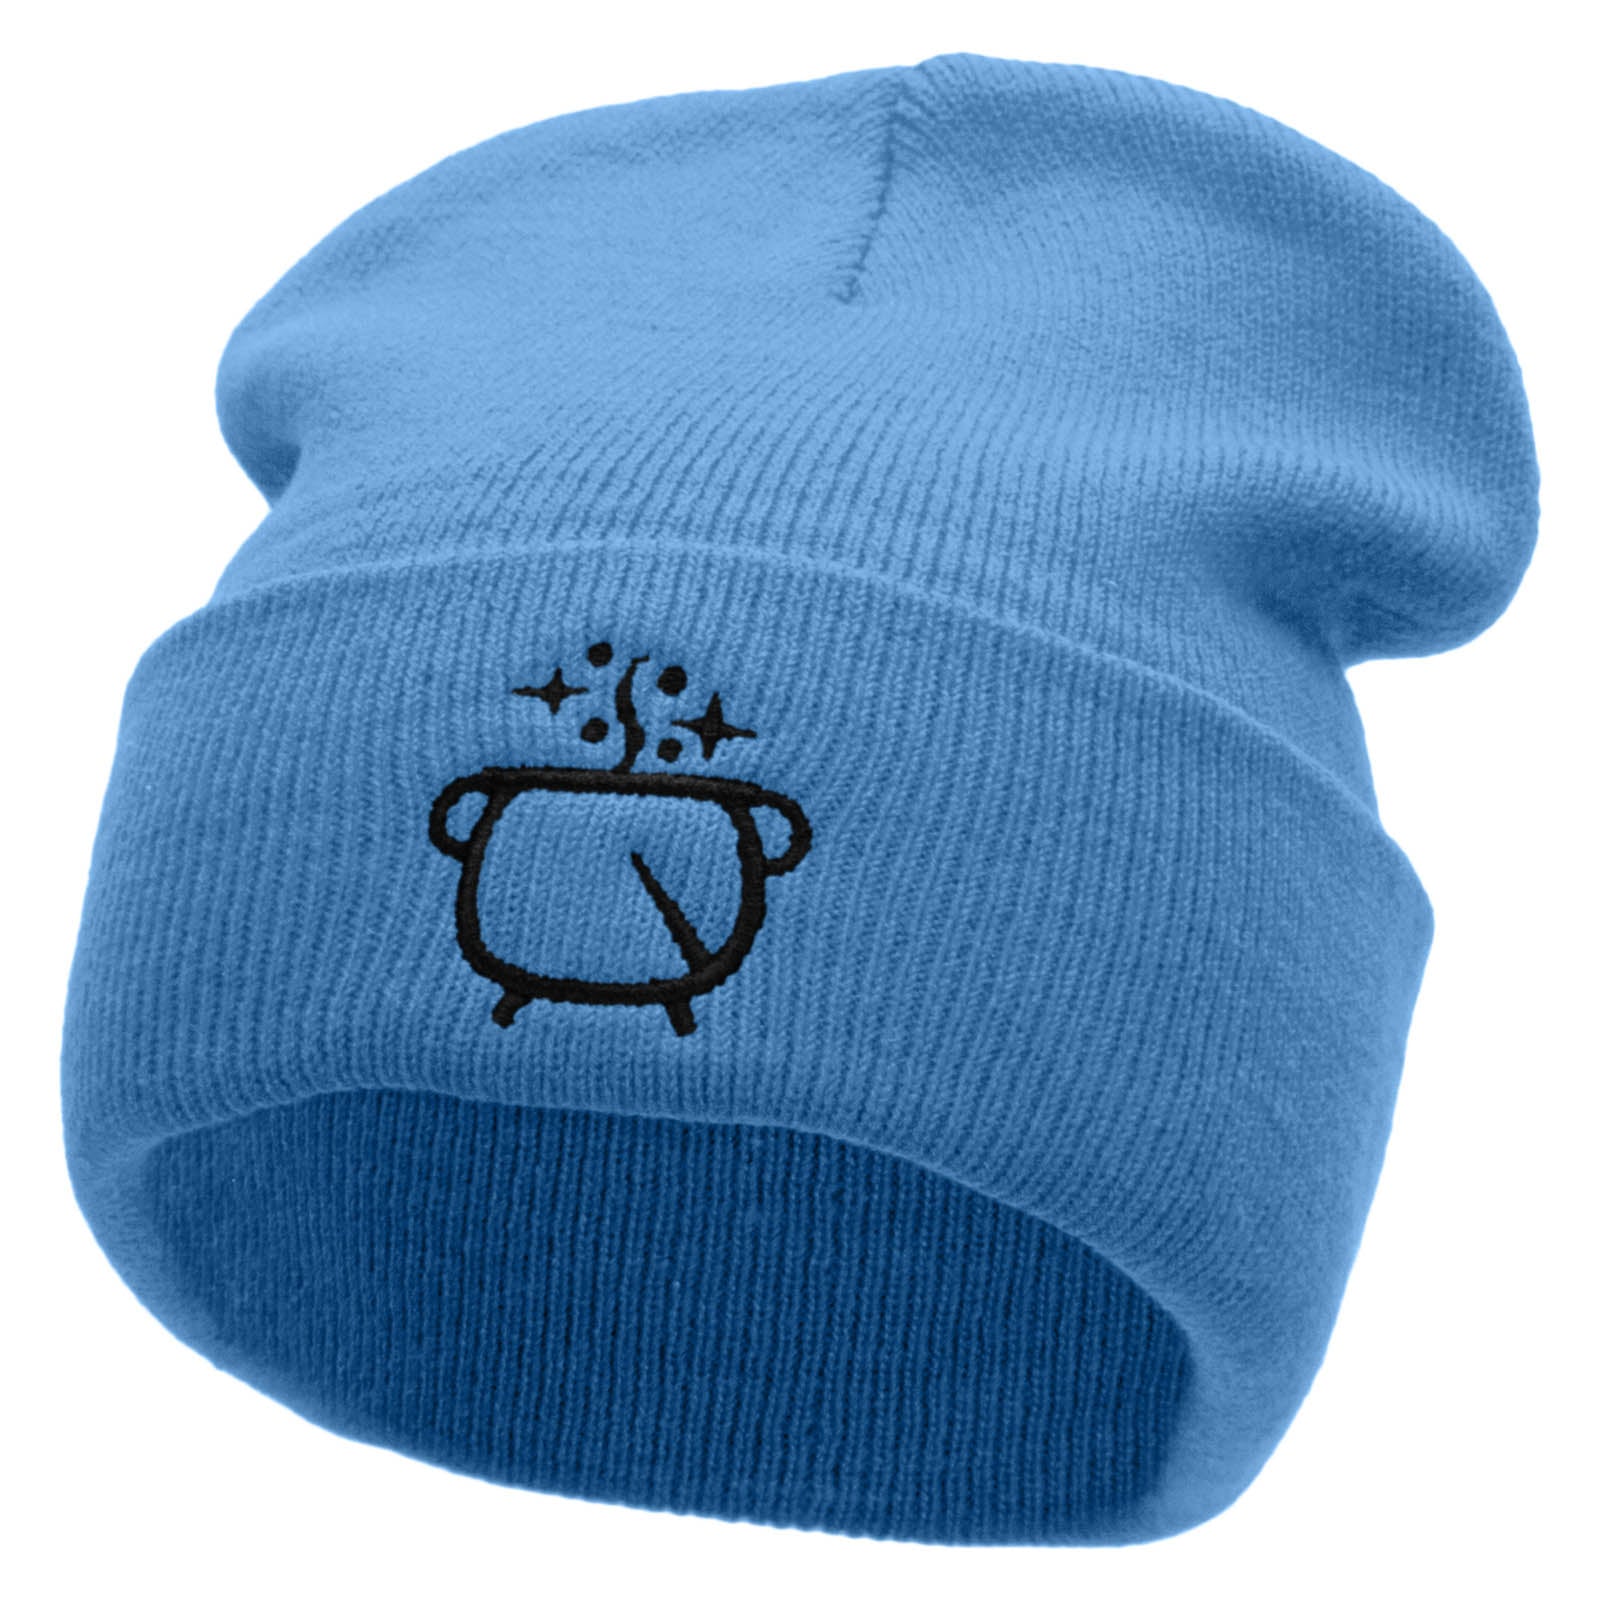 Witches Pot Embroidered 12 Inch Long Knitted Beanie - Sky Blue OSFM